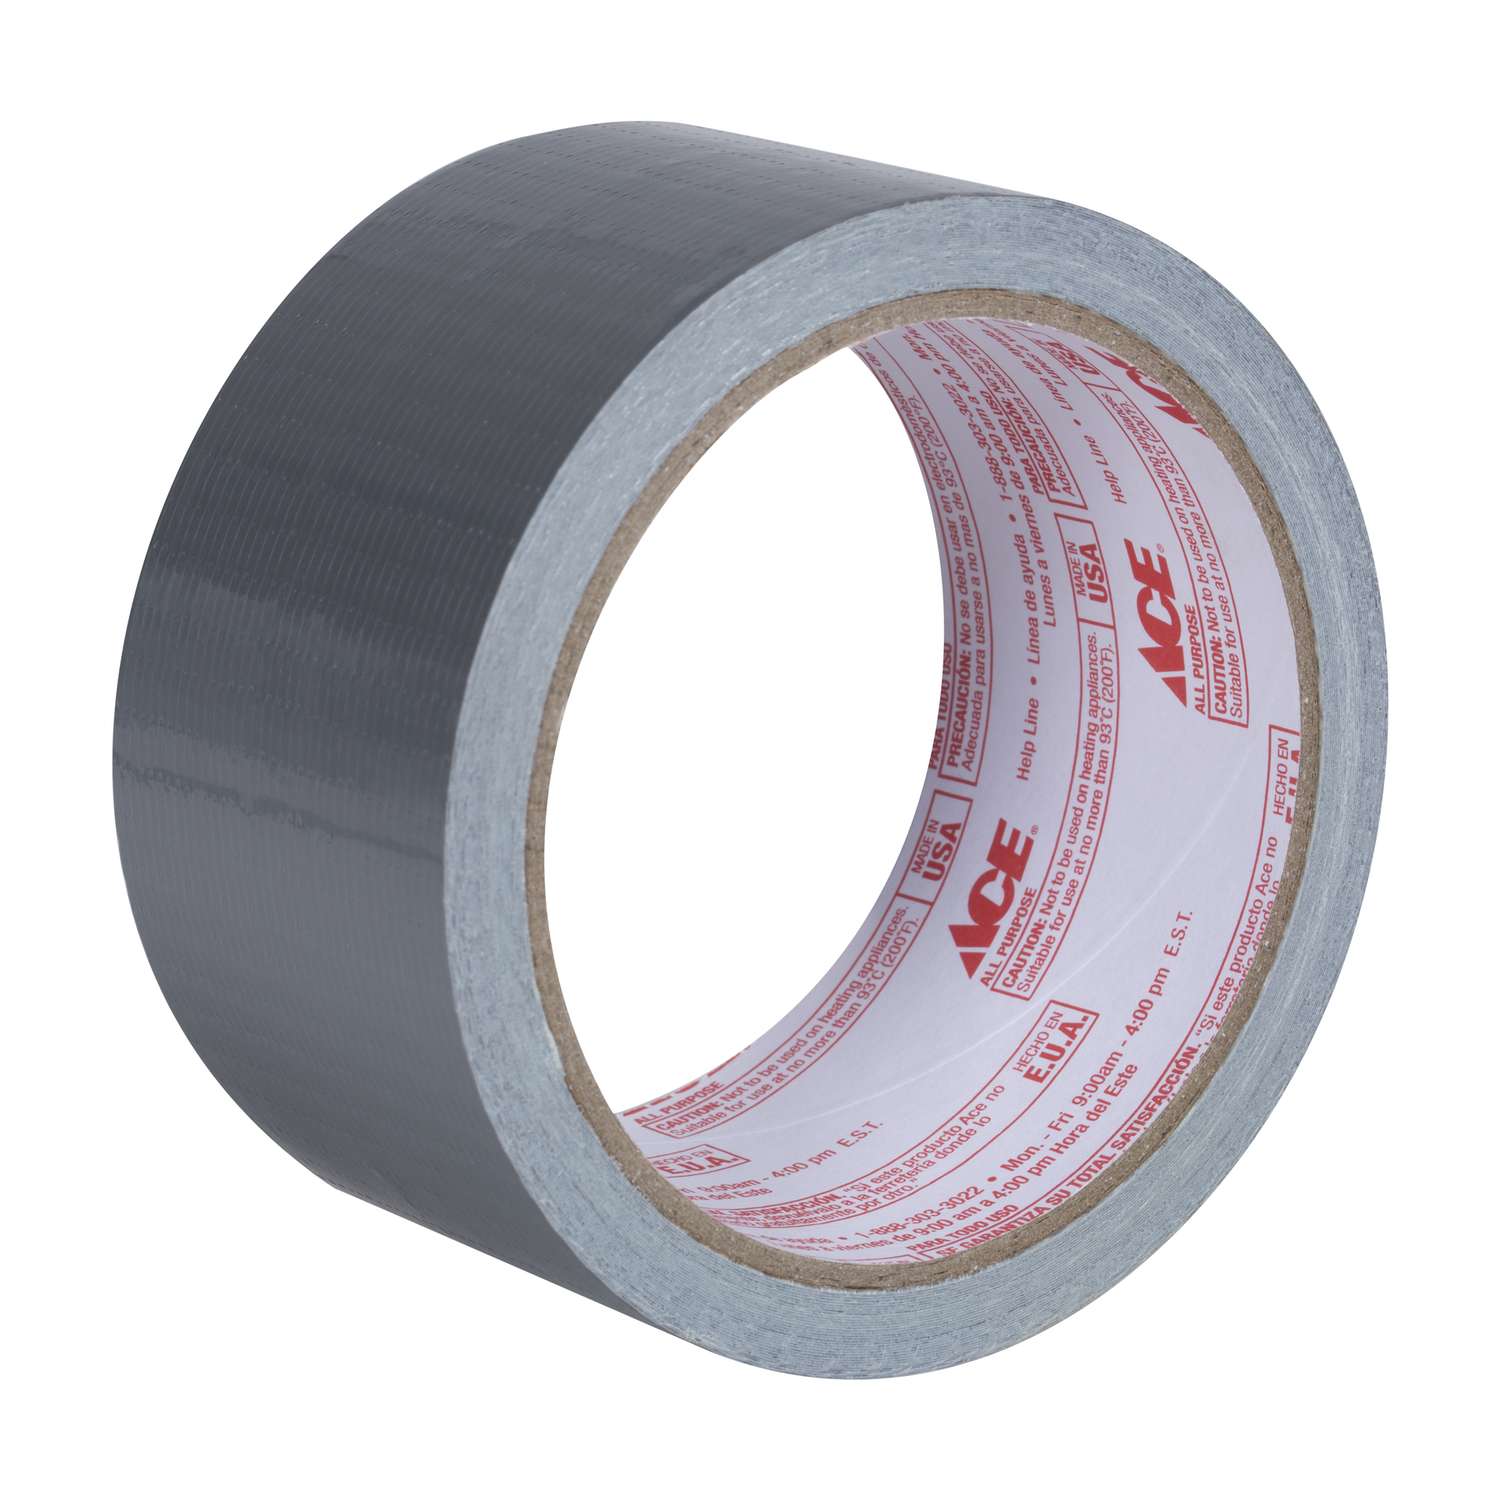 Ace 60 yds White Professional Grade Duck Tape